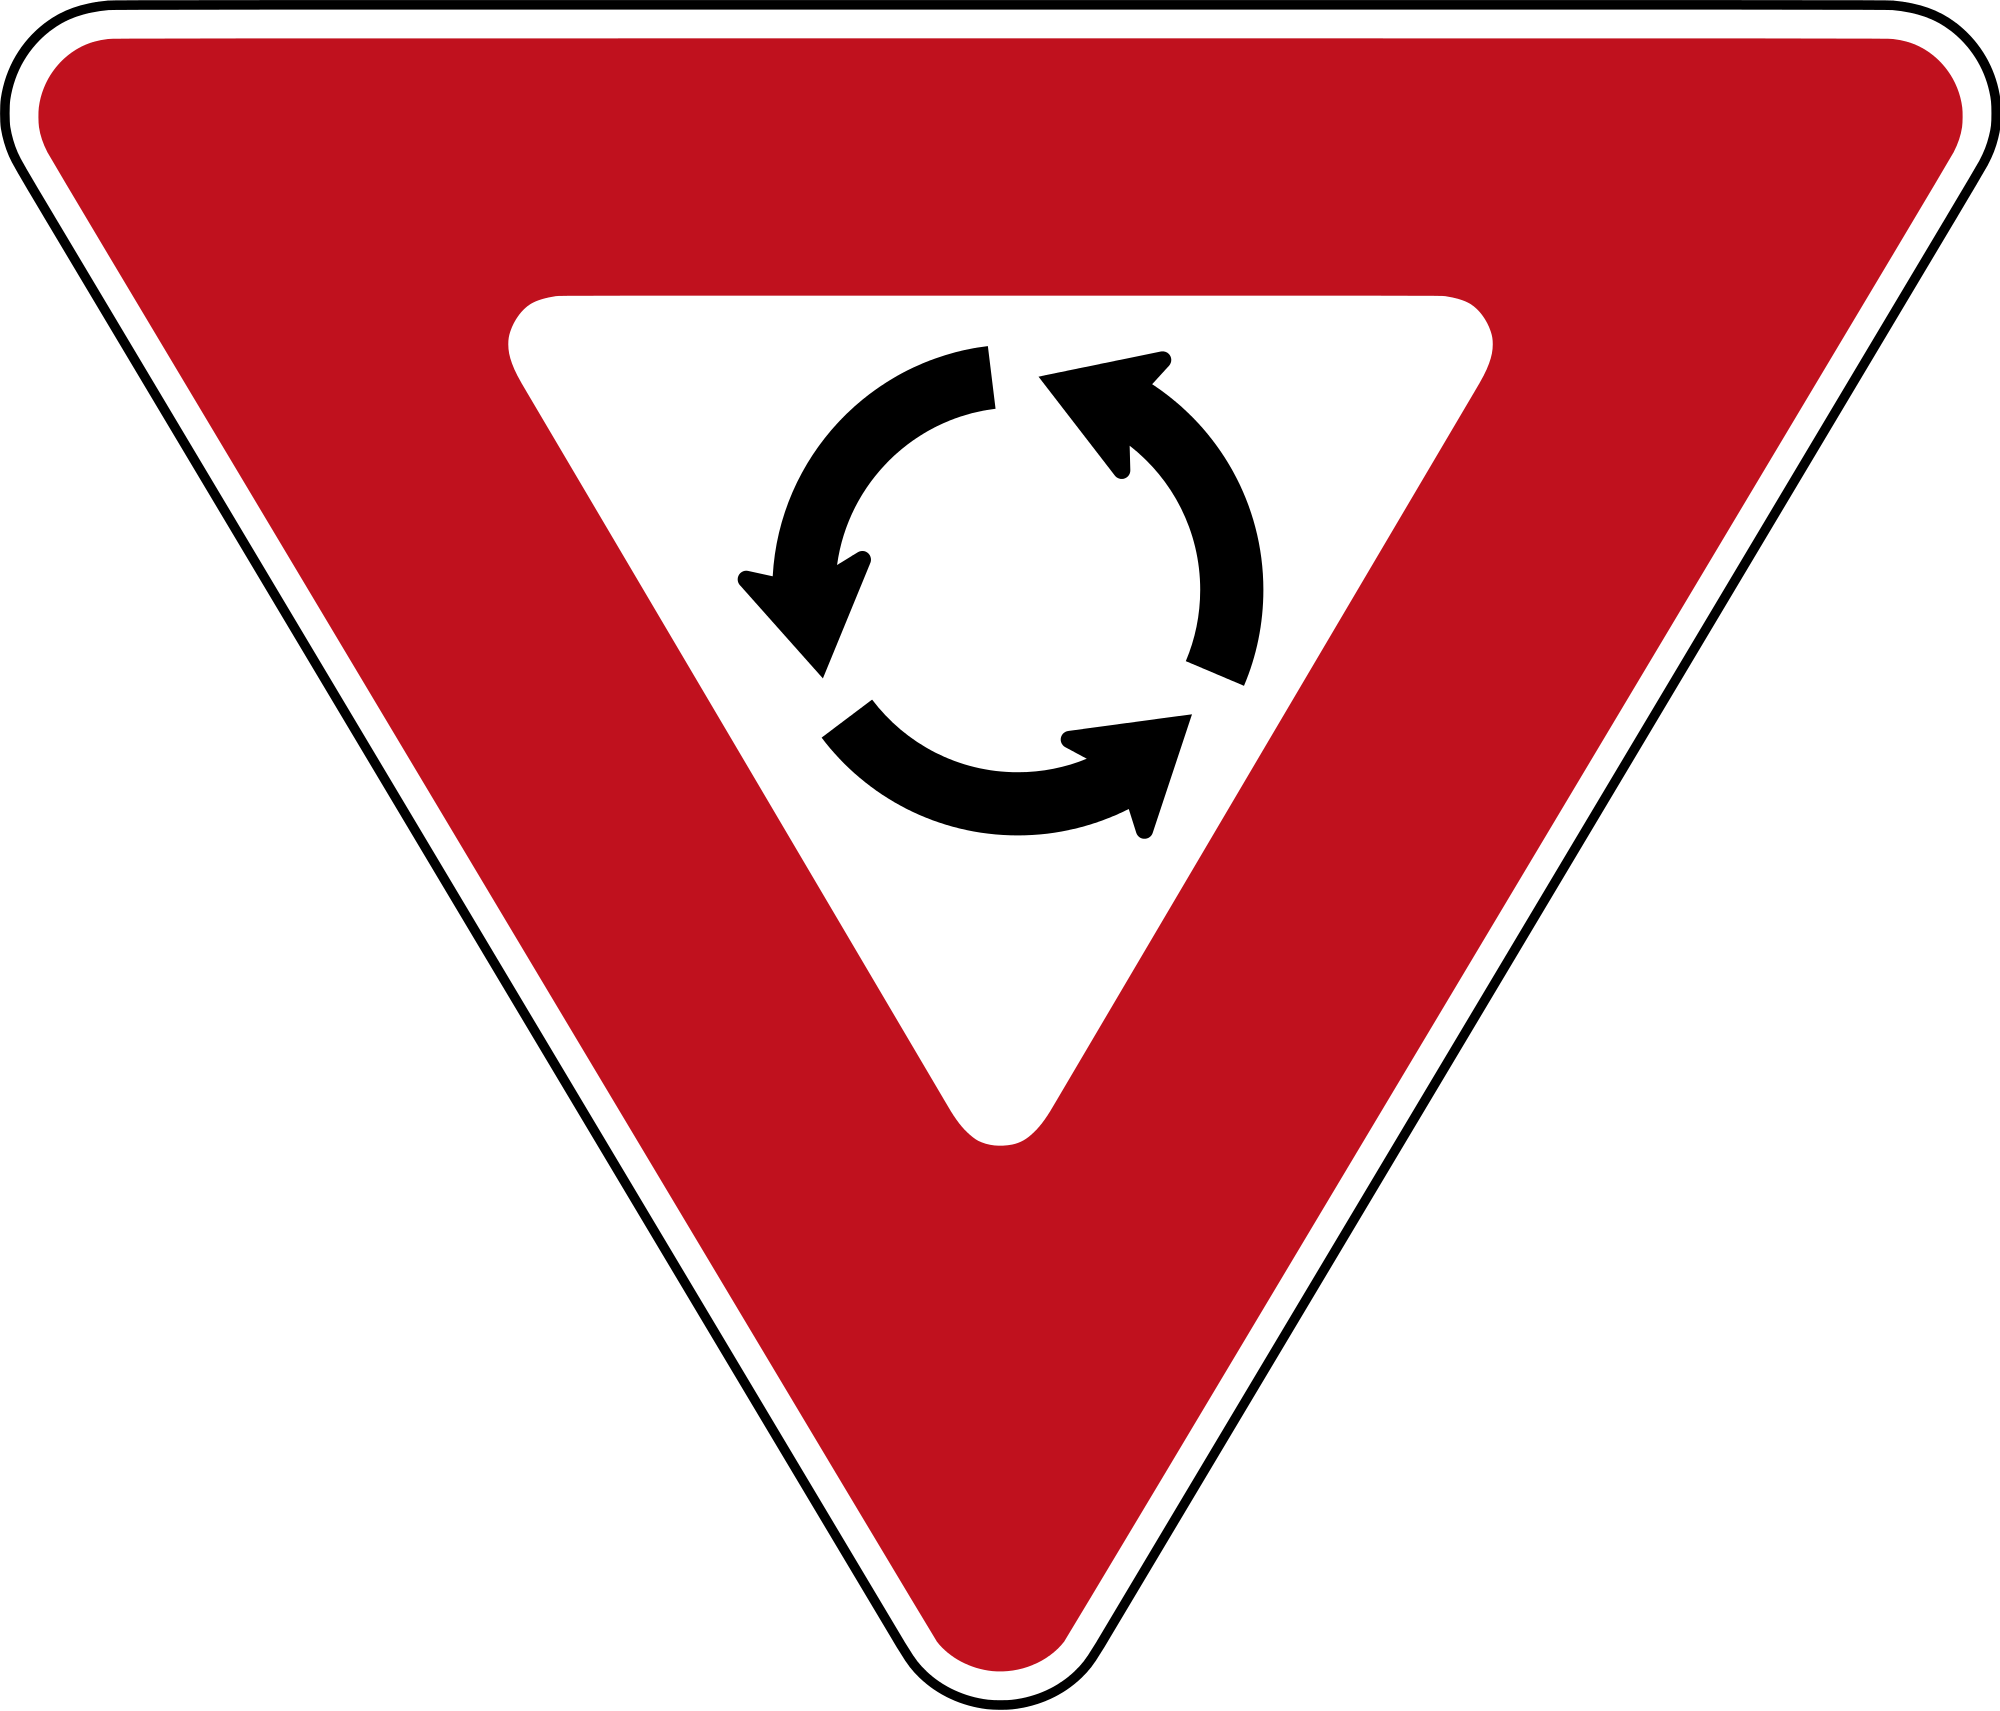 Yield At Roundabout - Yield At A Roundabout (2000x1711)